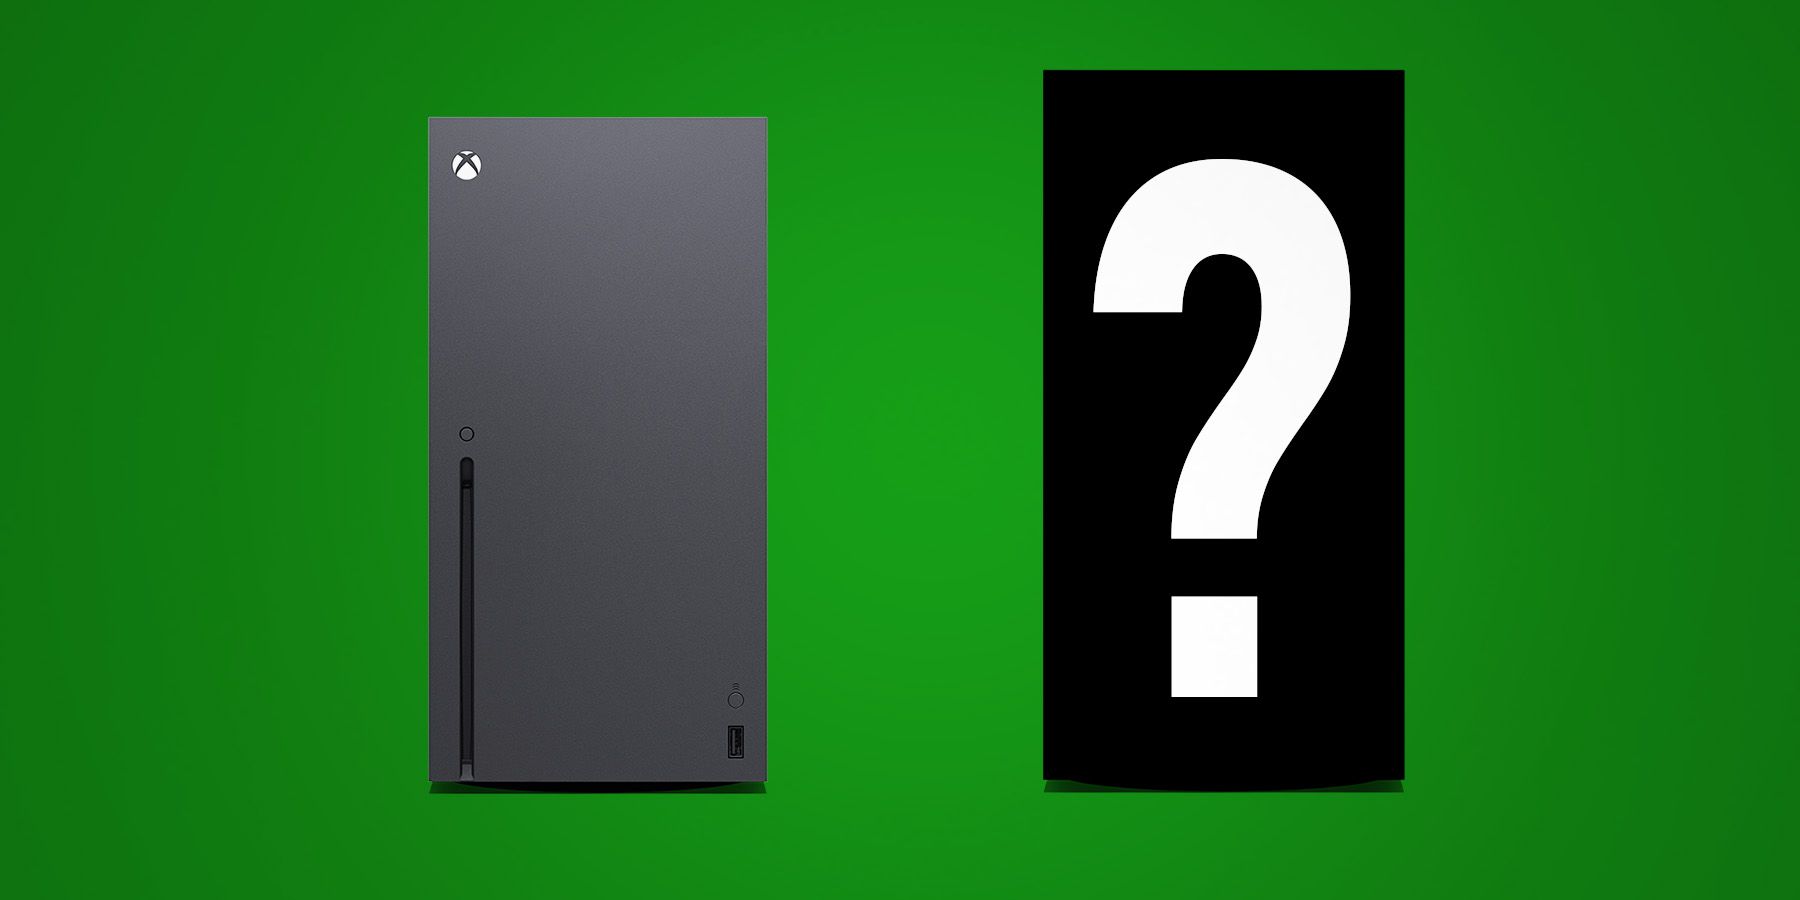 Xbox Series X next to larger console silhouette with question mark green background